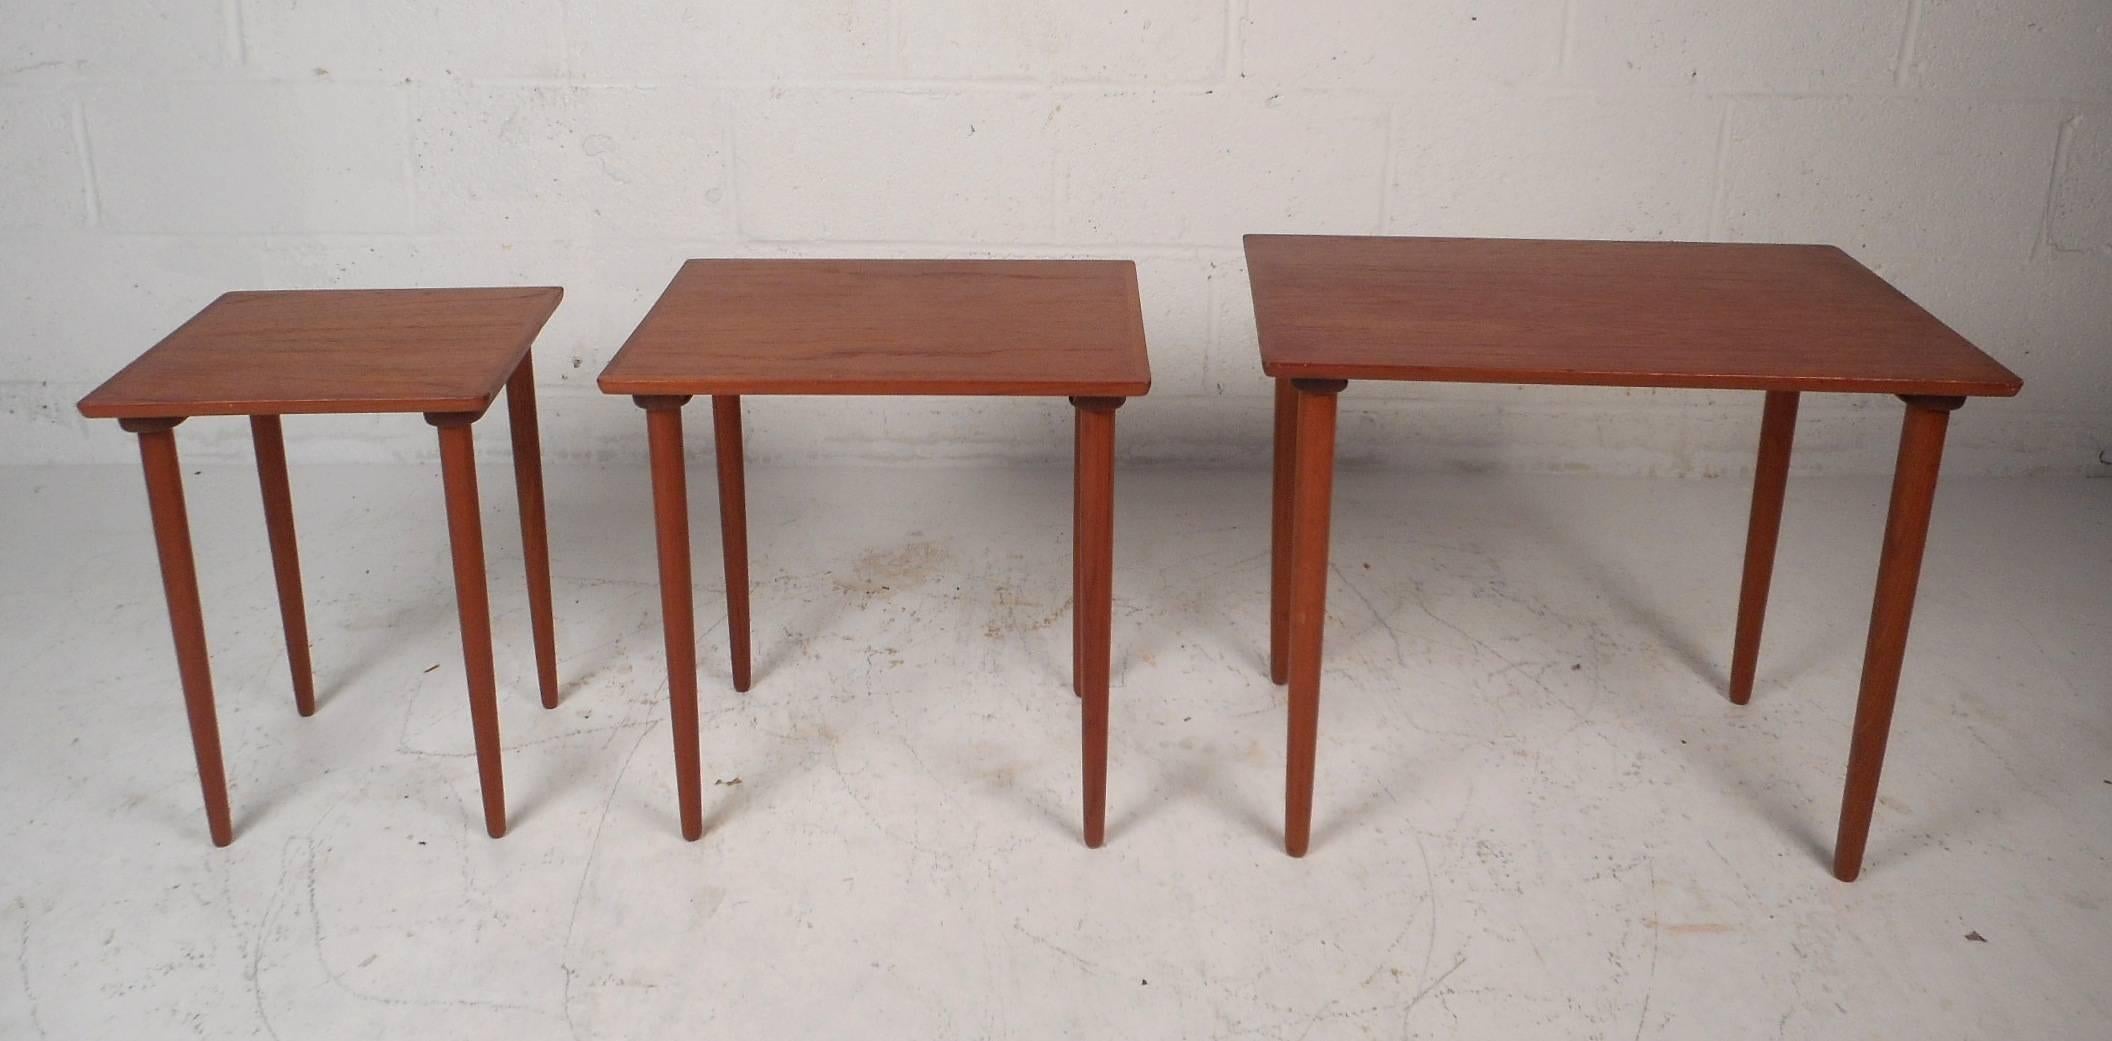 This gorgeous set of three vintage modern nesting tables feature long tapered legs and an elegant teak wood grain throughout. Sleek design allows each table to slide comfortably underneath each other for convenient storage. This wonderful Danish